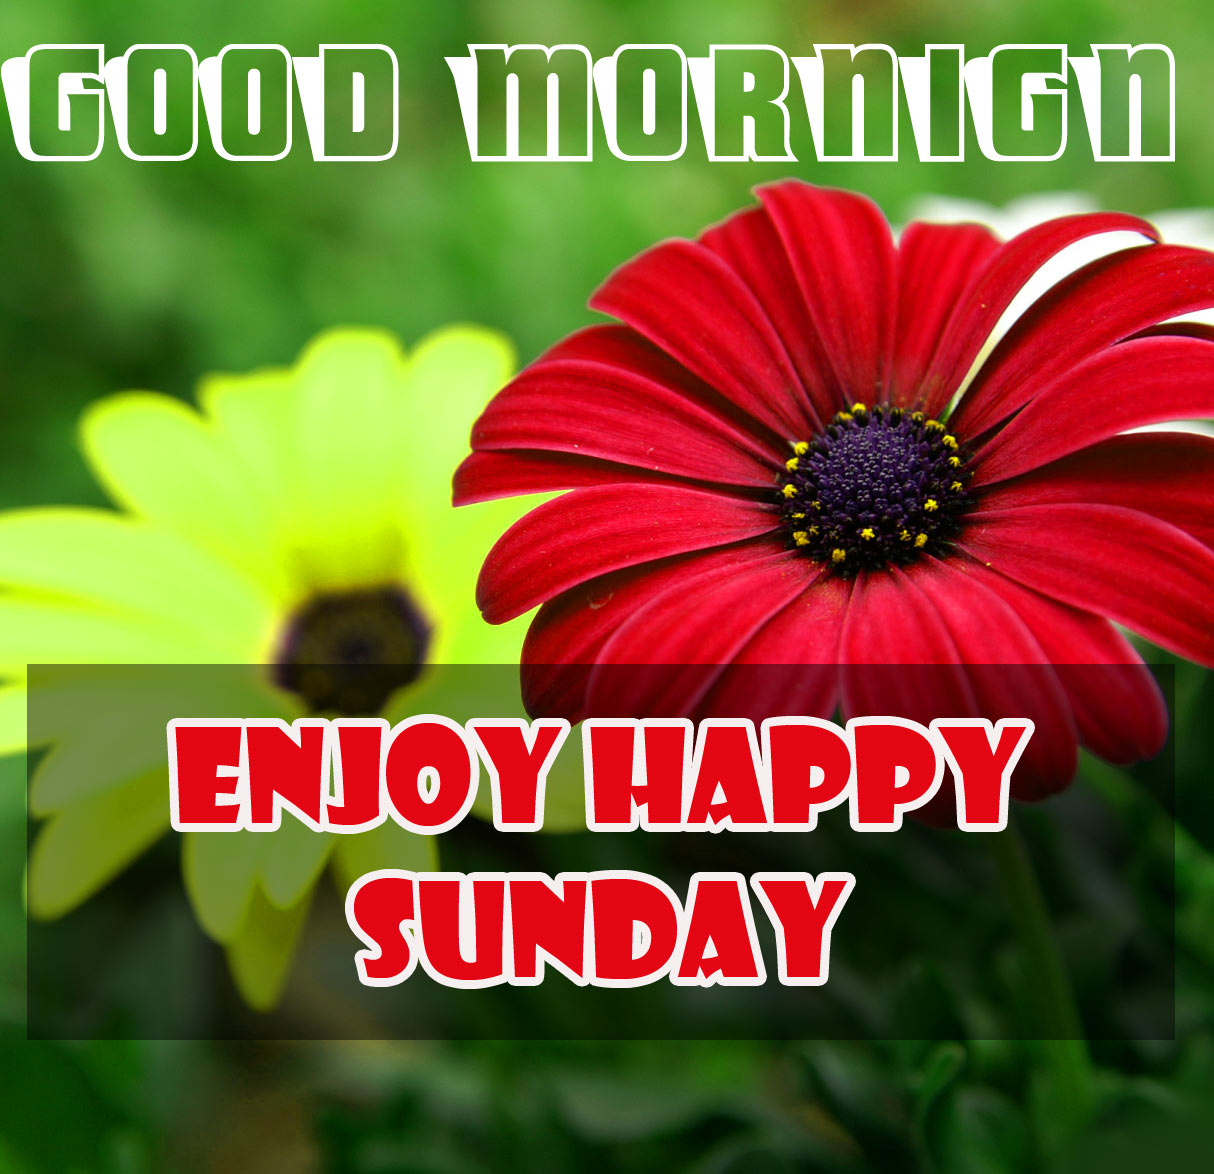 Sunday Good Morning Wishes Pics Free for Facebook